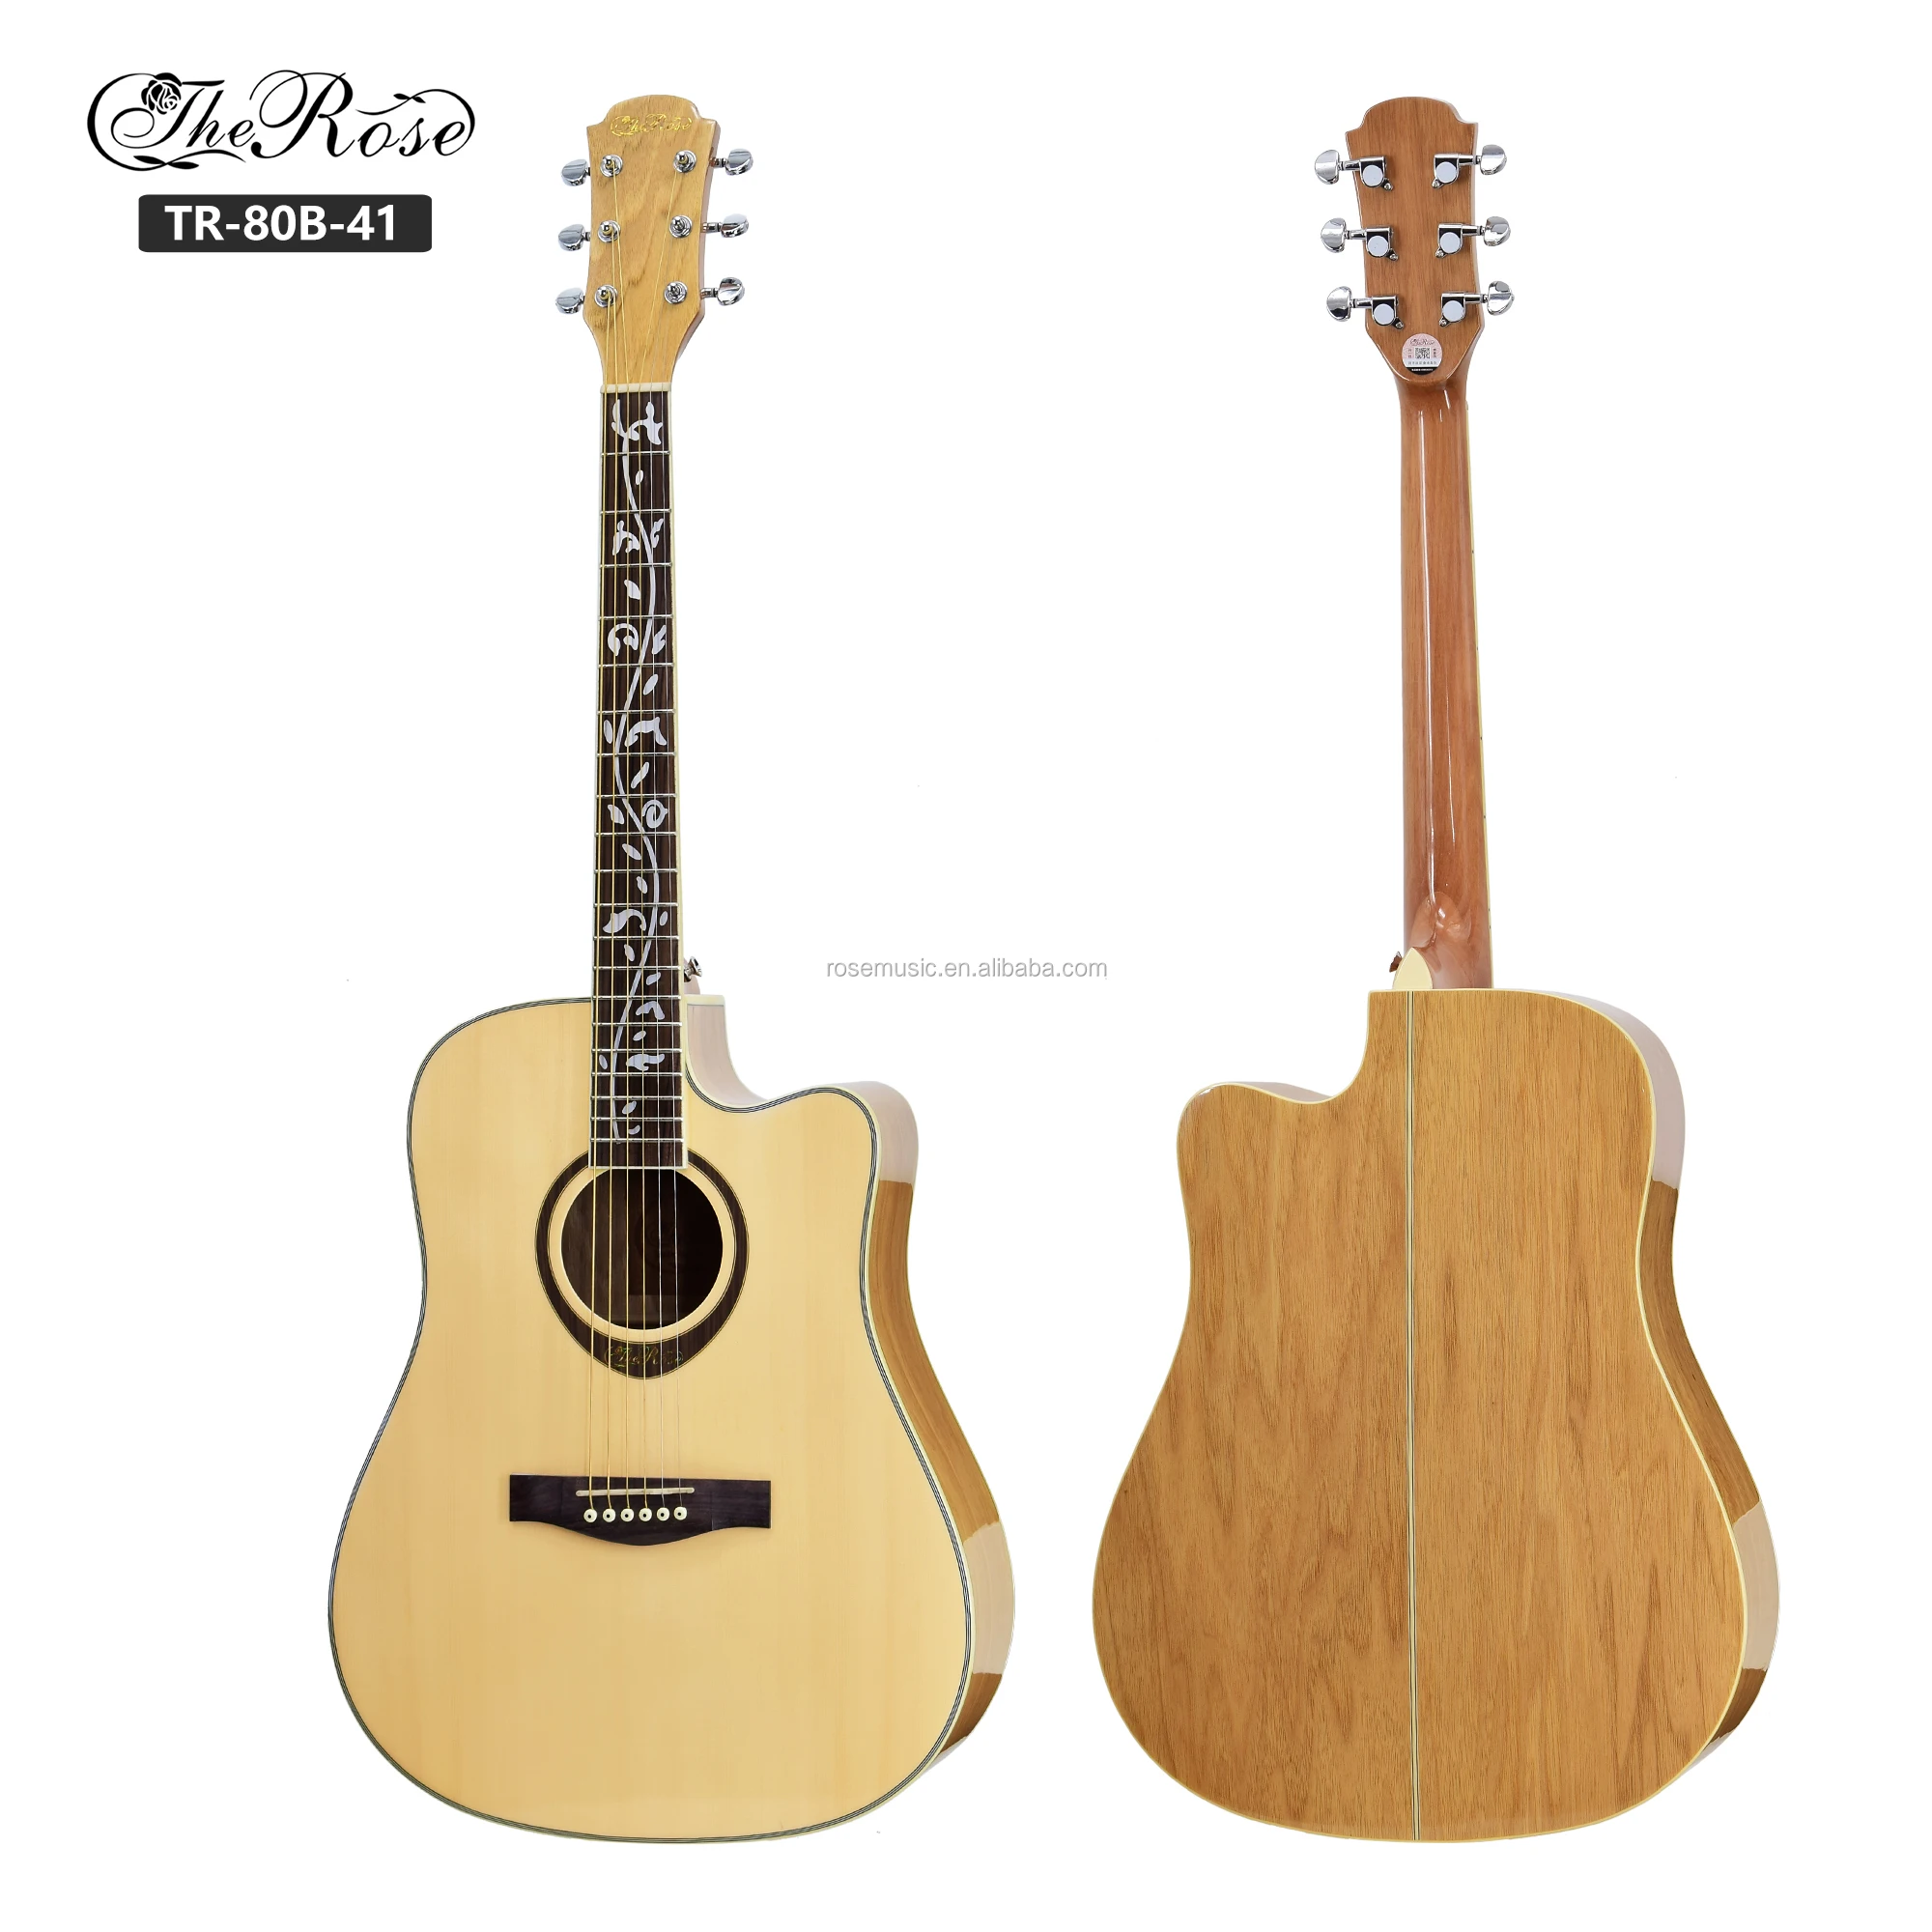 High Quality 41 Inch Acoustic Guitar For Sale - Buy Handmade Acoustic